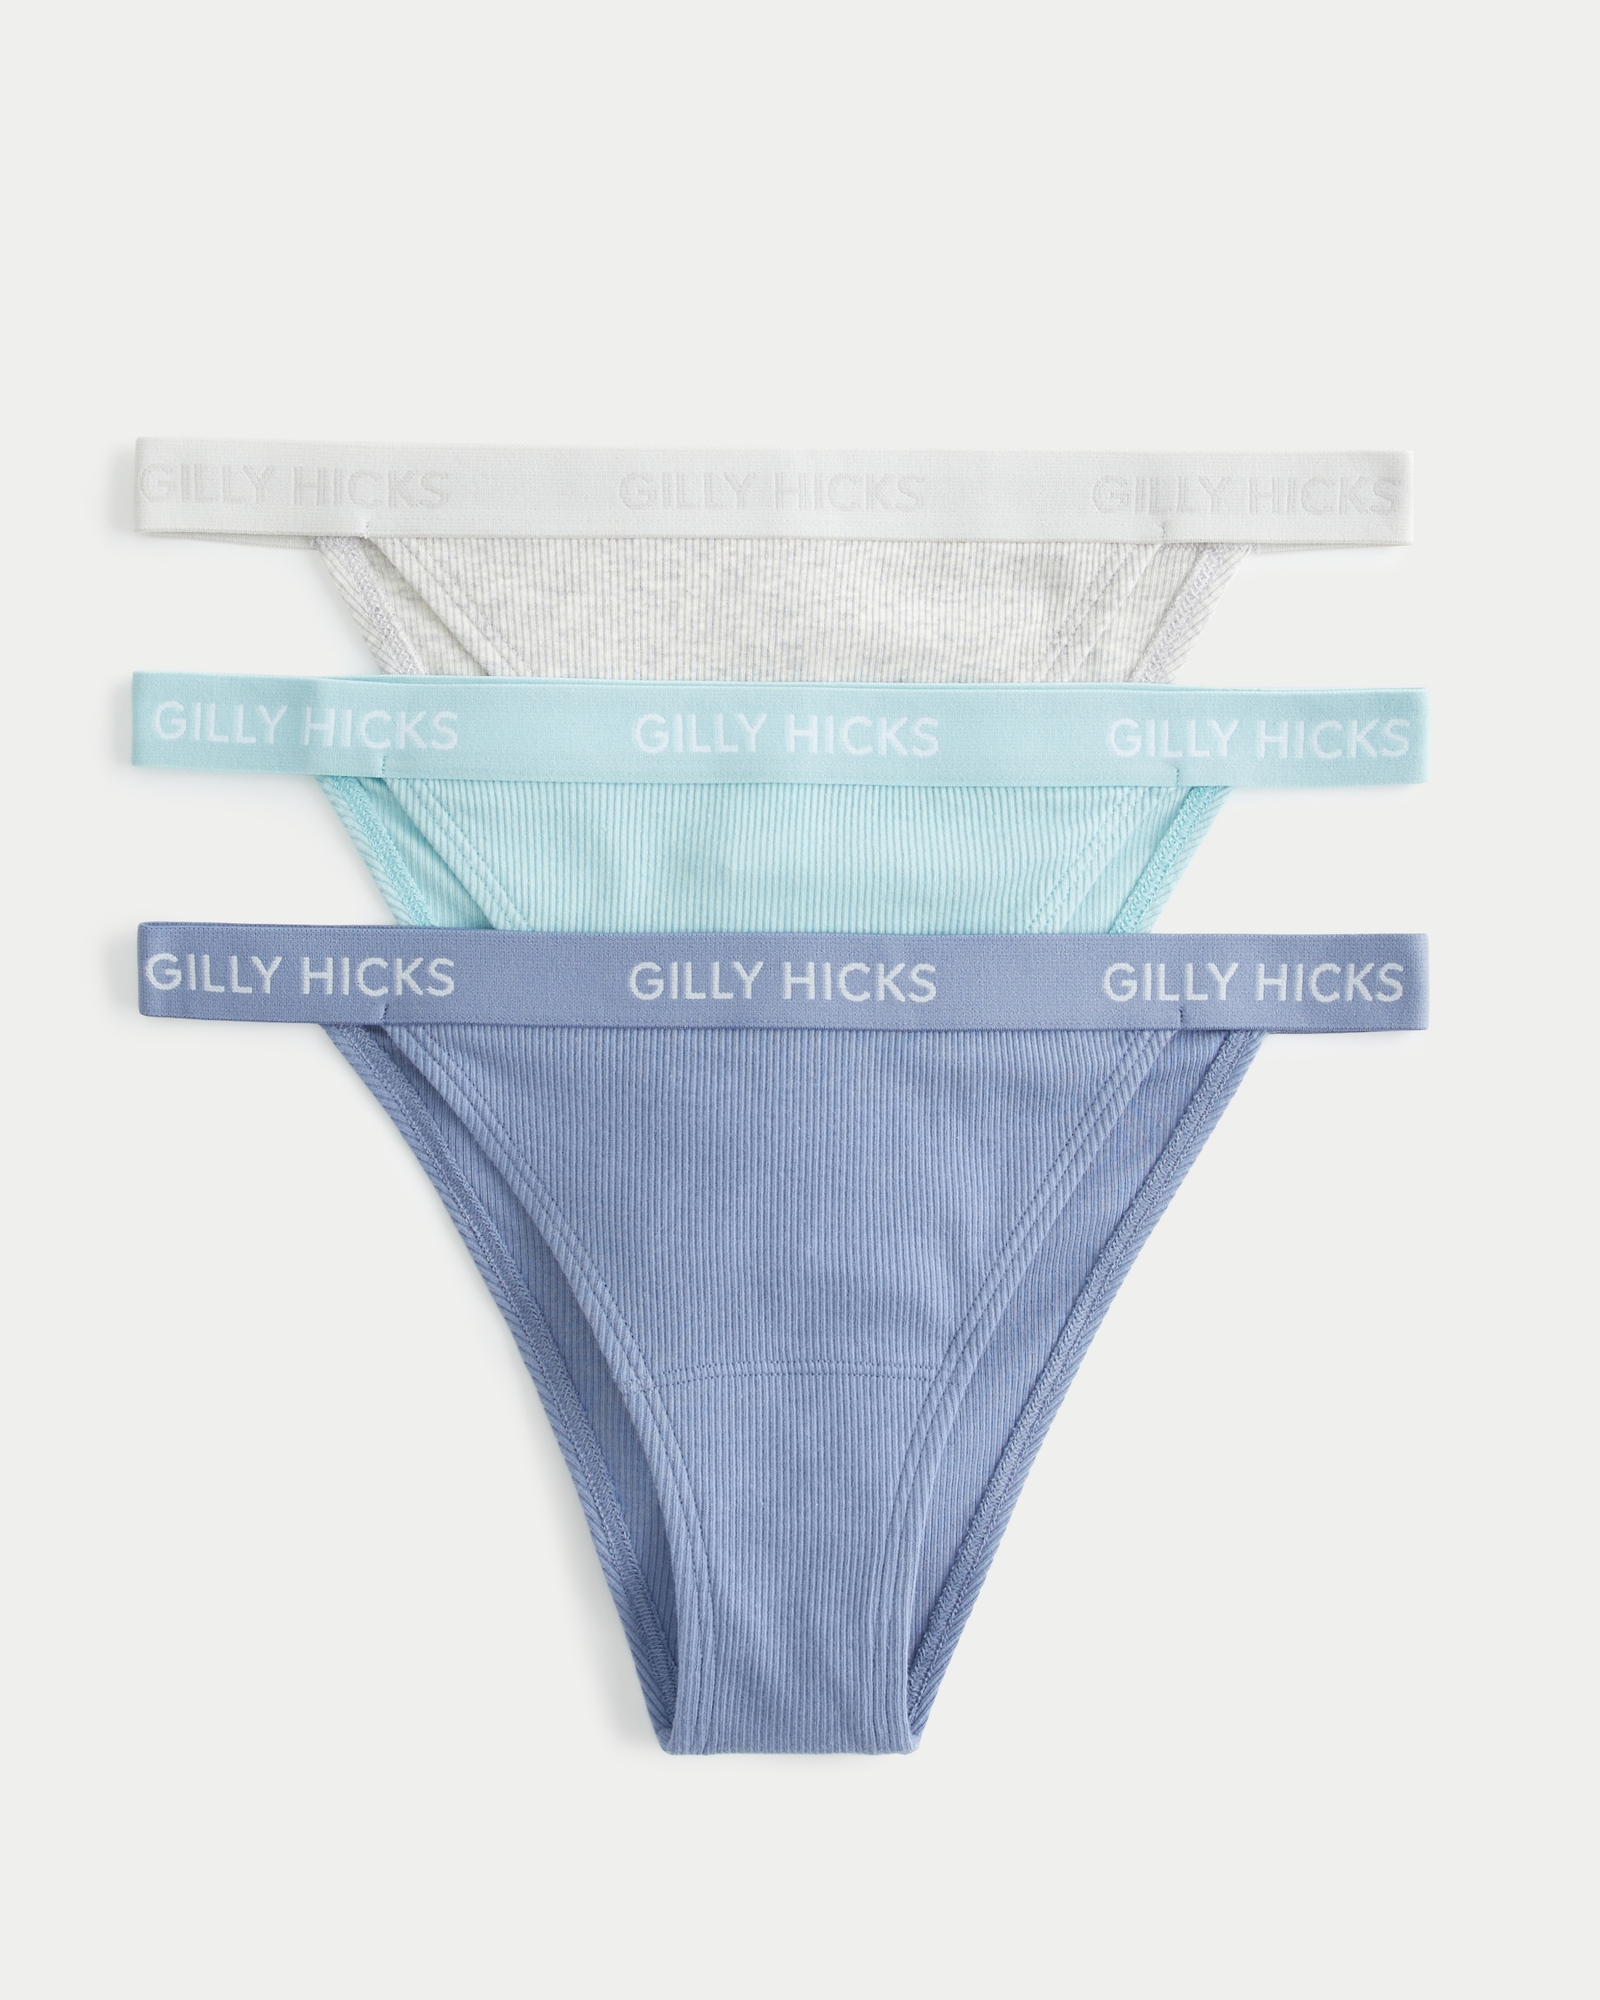 GILLY HICKS by Abercrombie Hollister PANTIES Blue Lace Back Hiphugger L NWT